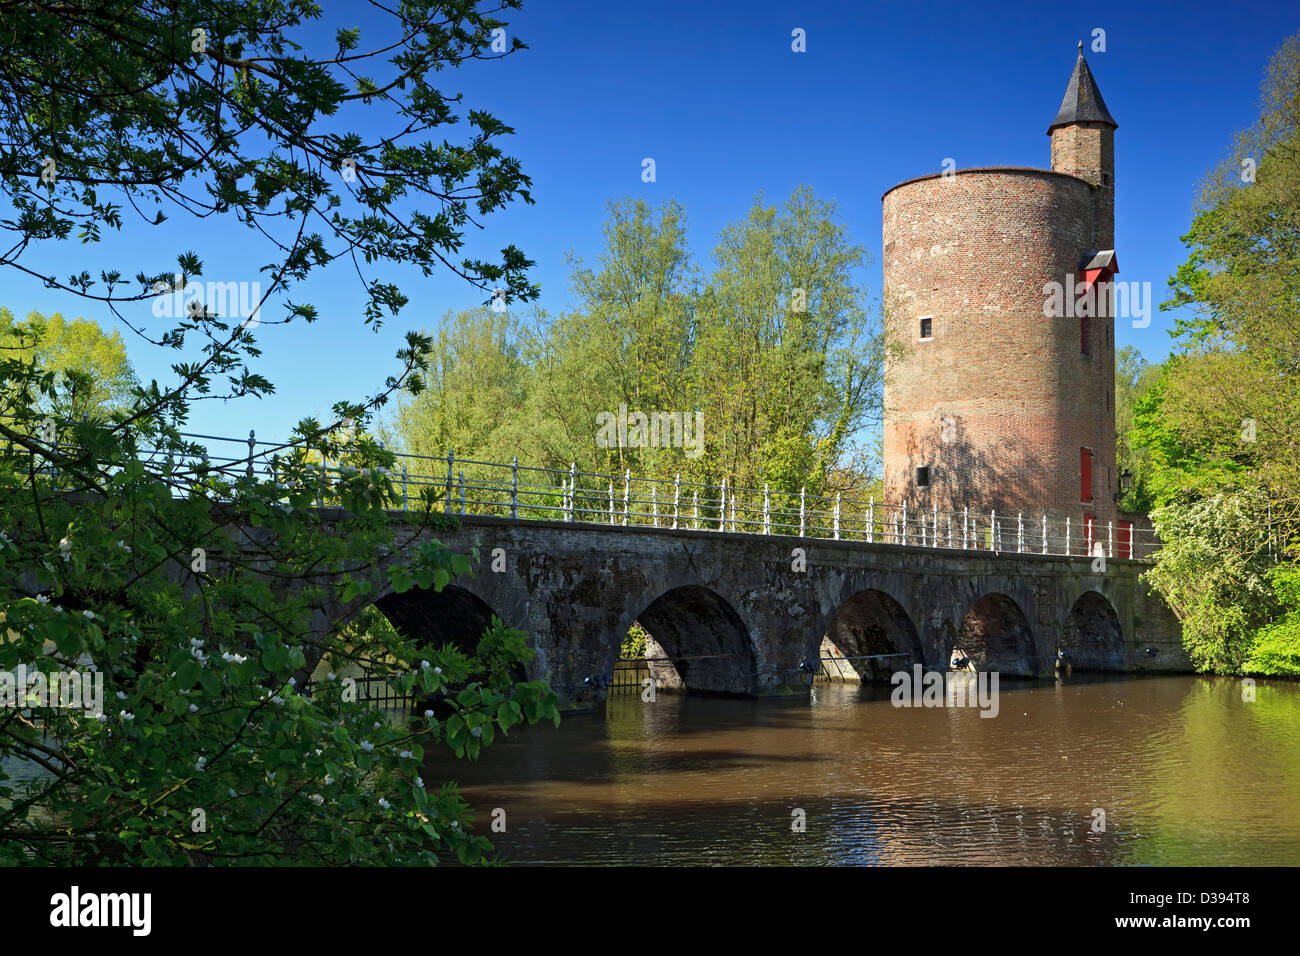 Tower Bridge e canal, parco Minnewater, Bruges, Belgio Foto Stock